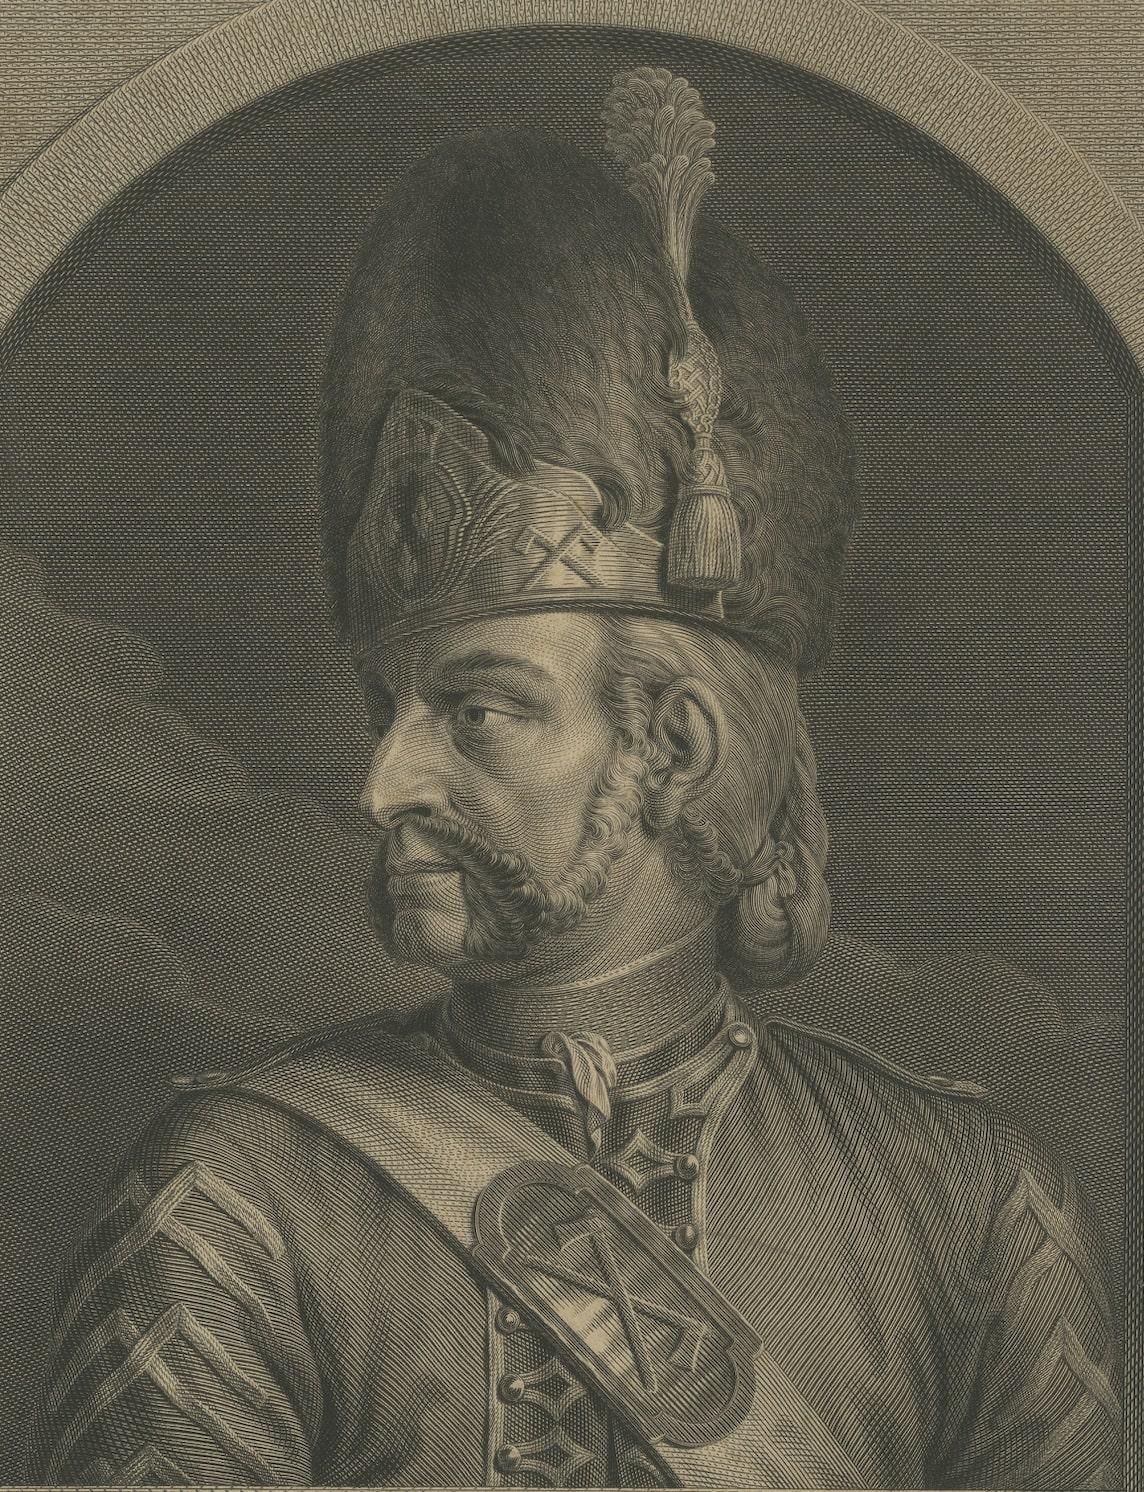 This original print is Johann Georg Wille's copper engraving of a Sappeur of the Swiss Guard from 1779. Wille was a notable artist and engraver known for his portraits and engravings during the 18th century.

The piece depicts a half-length portrait